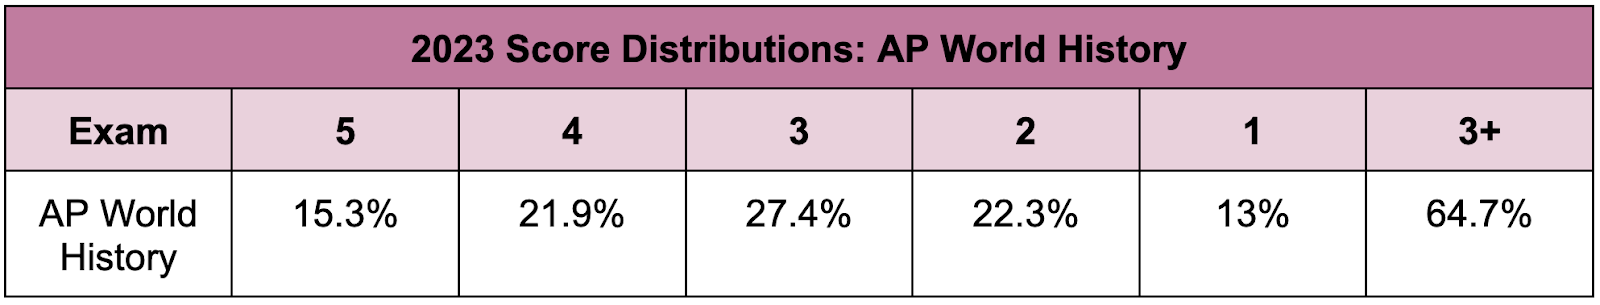 A table showing the distribution of the AP World History Exam scores in 2023